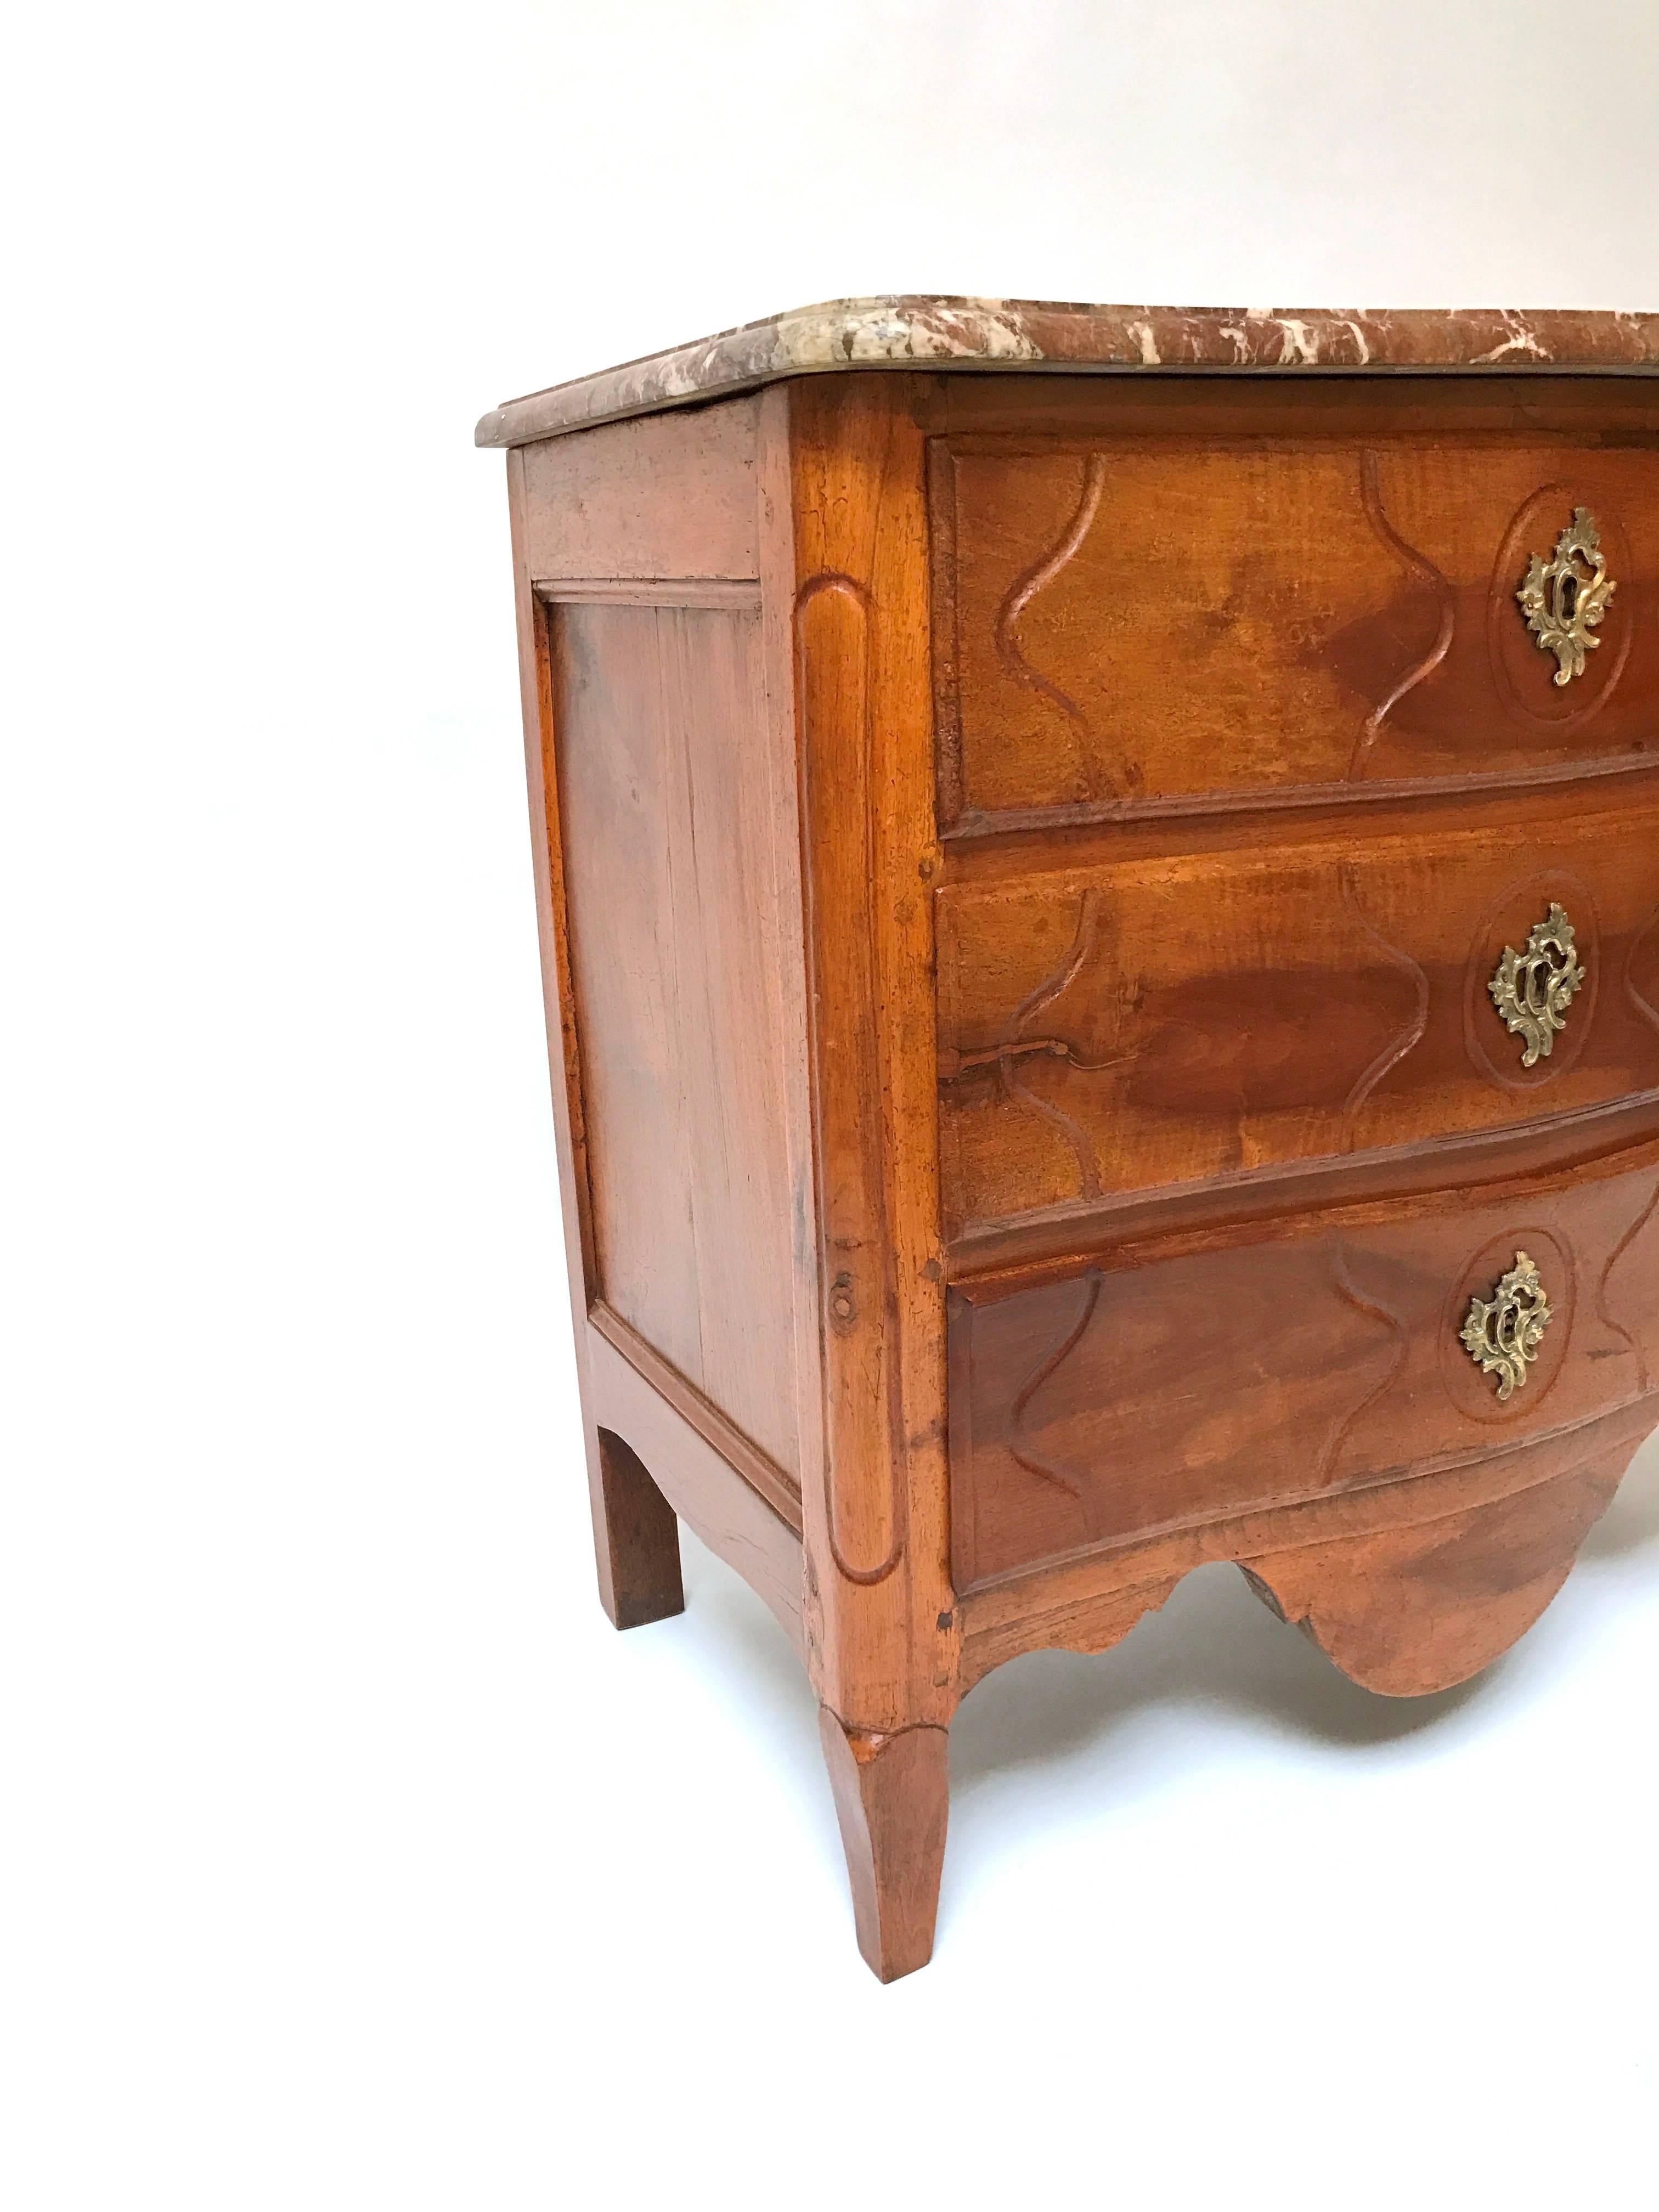 Charming 18th century period Louis XV French petite commode in oak with marble top, three drawers and original hardware, France, circa 1760.